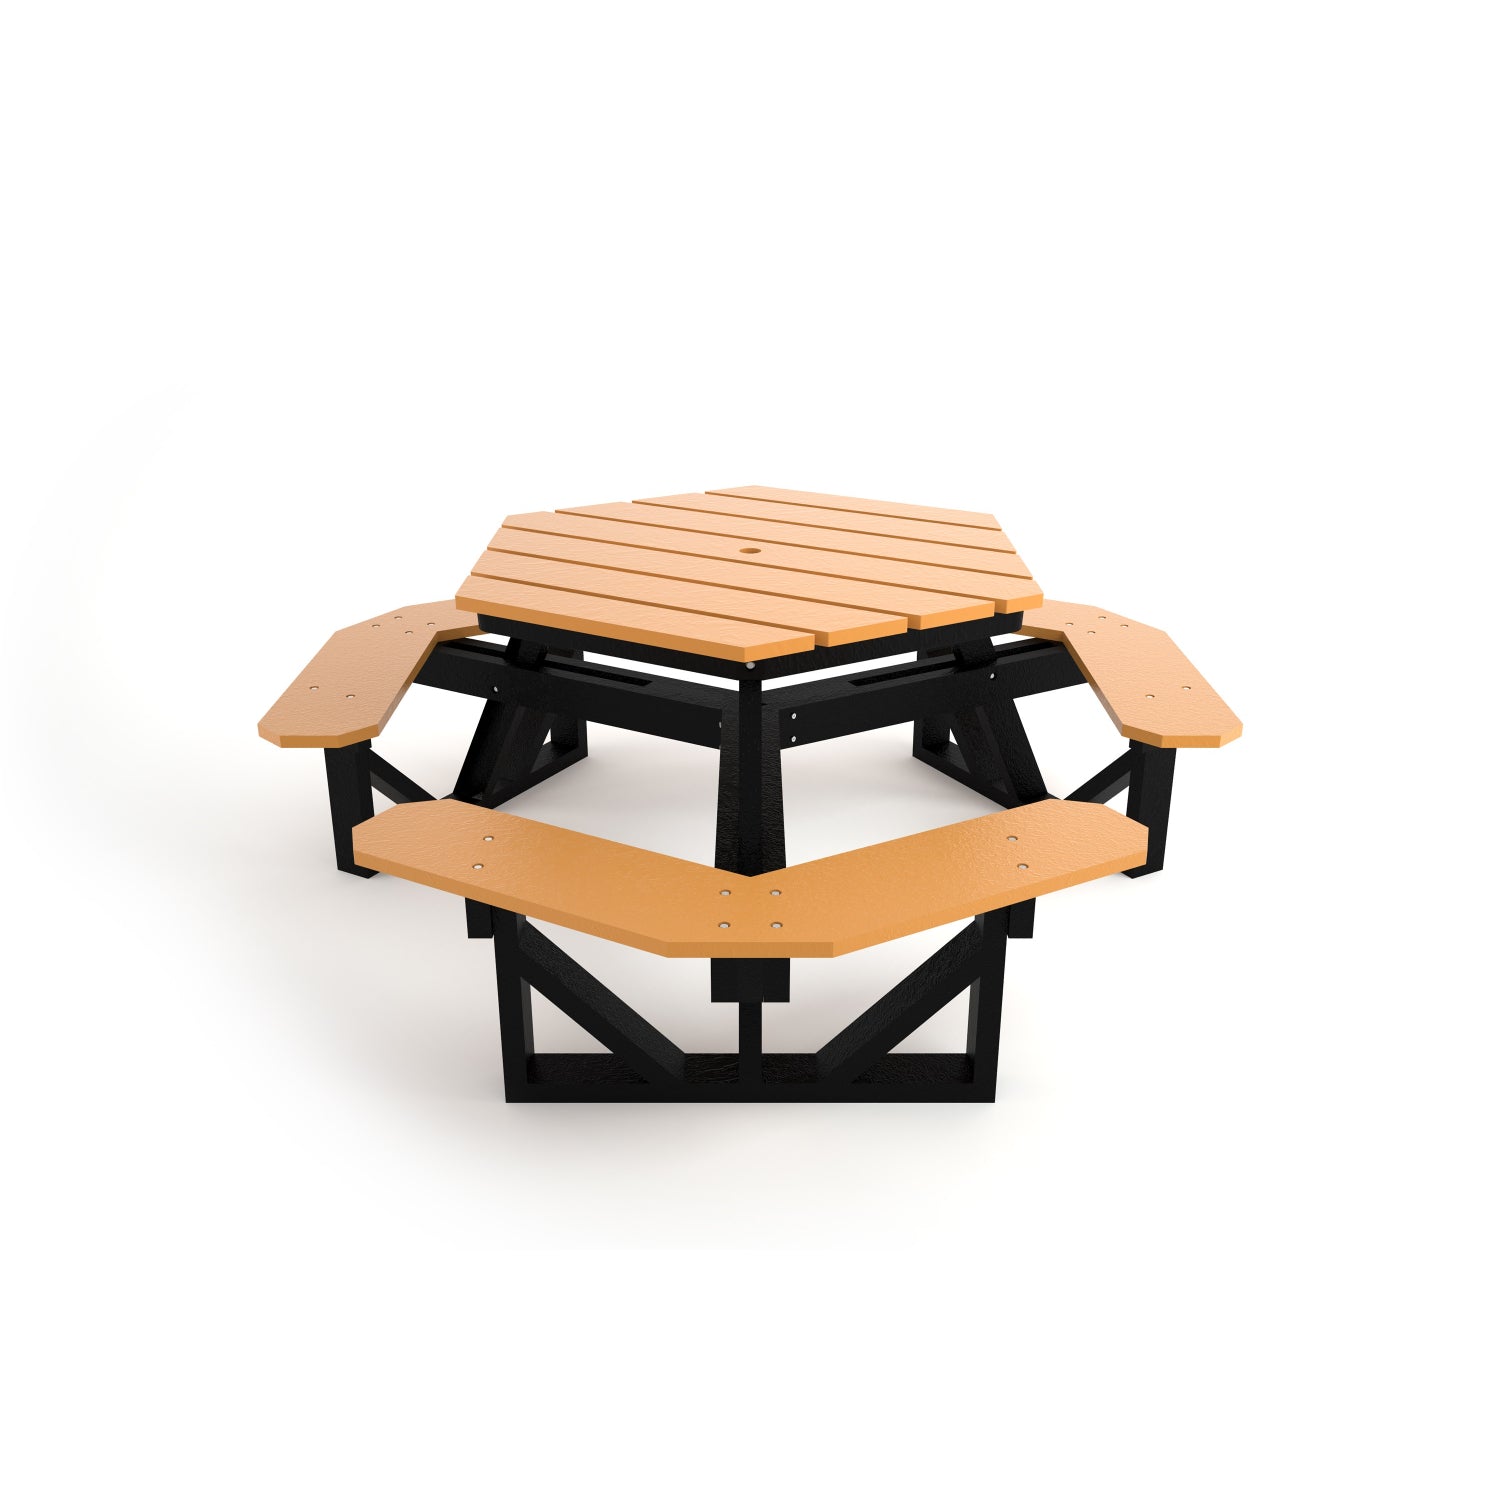 Frog Furnishings Hex Resinwood Outdoor Picnic Table, 6 Ft. Dia.